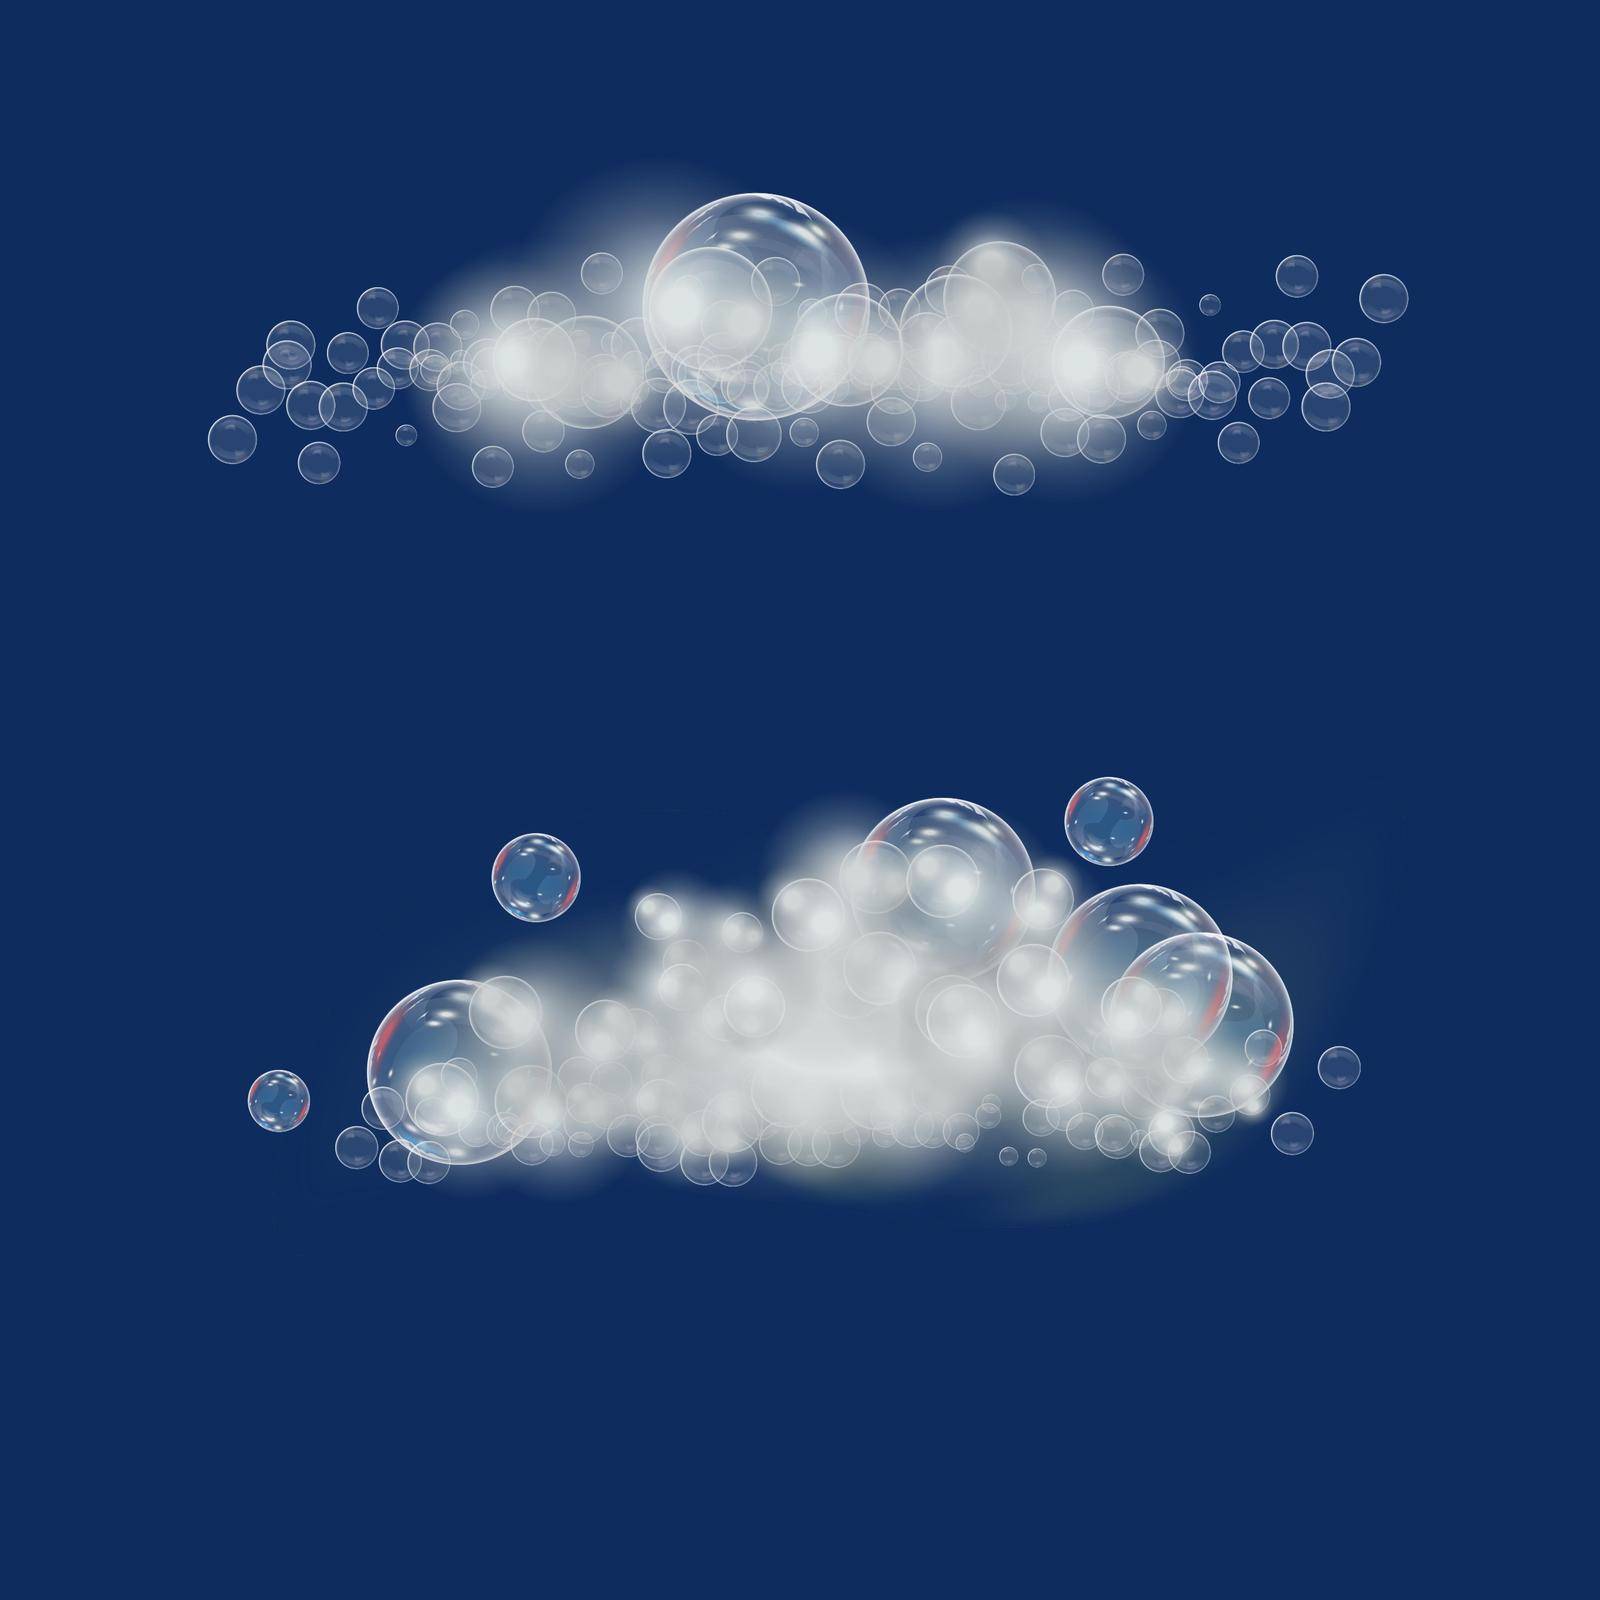 foam with soap in the form of clouds on a blue background. Shampoo and foam vector illustration. by Samodelkin20